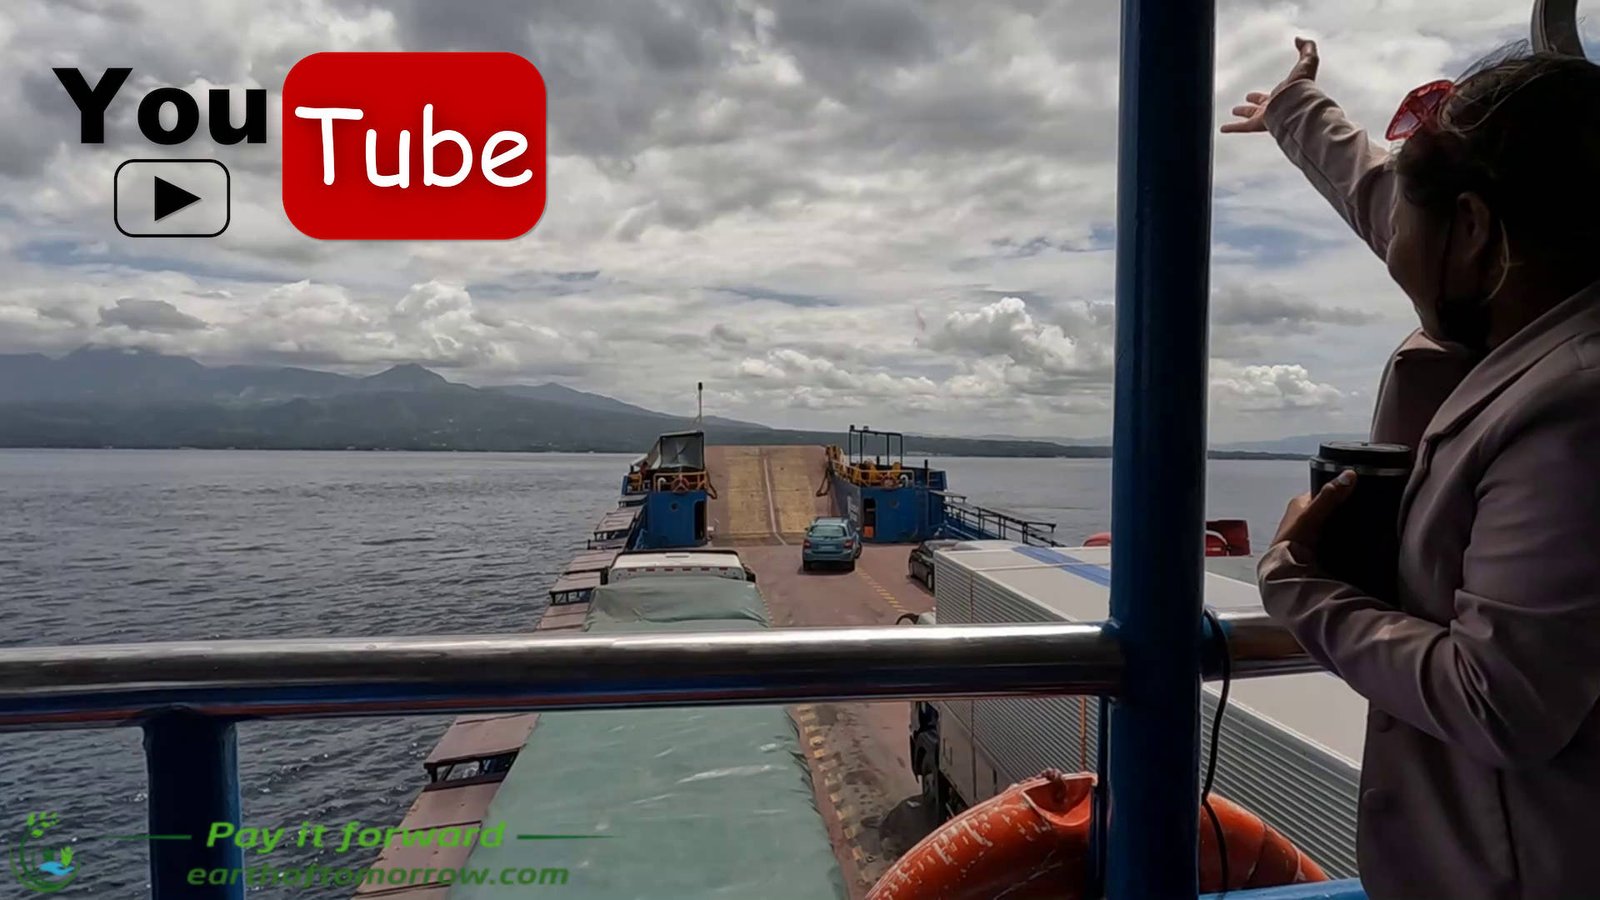 We go to Dumaguete to receive a passport for Liam. Video